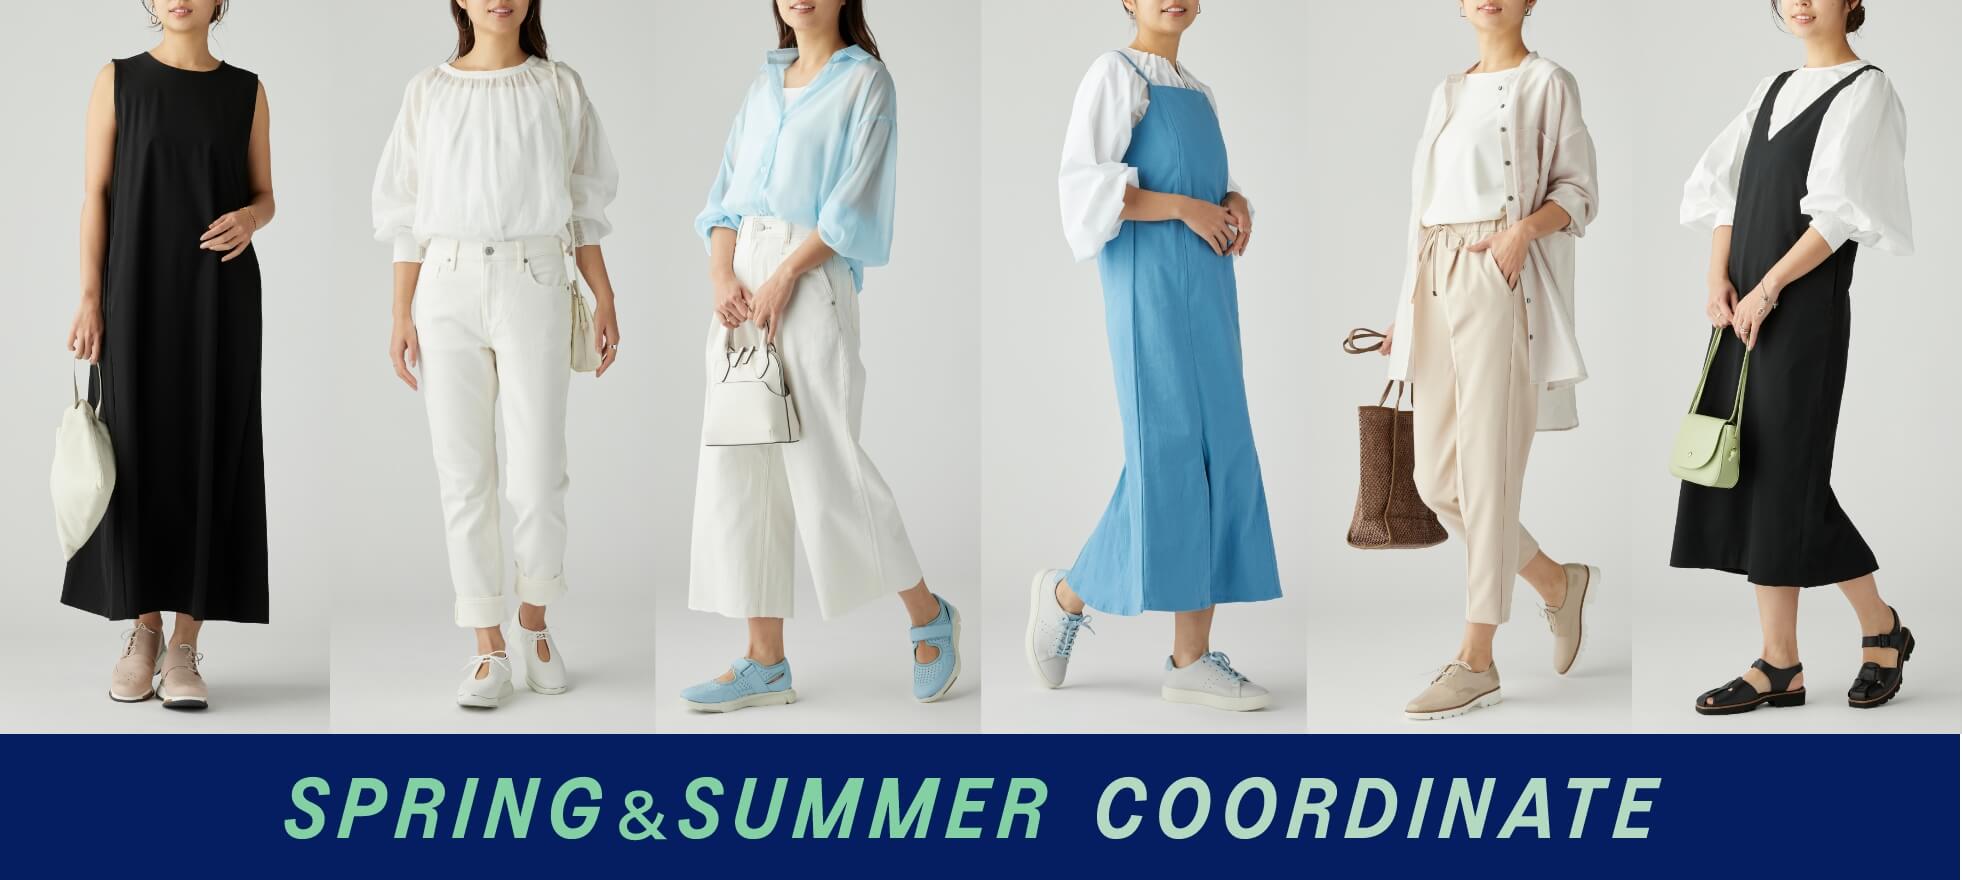 SPRING＆SUMMER COODINATE